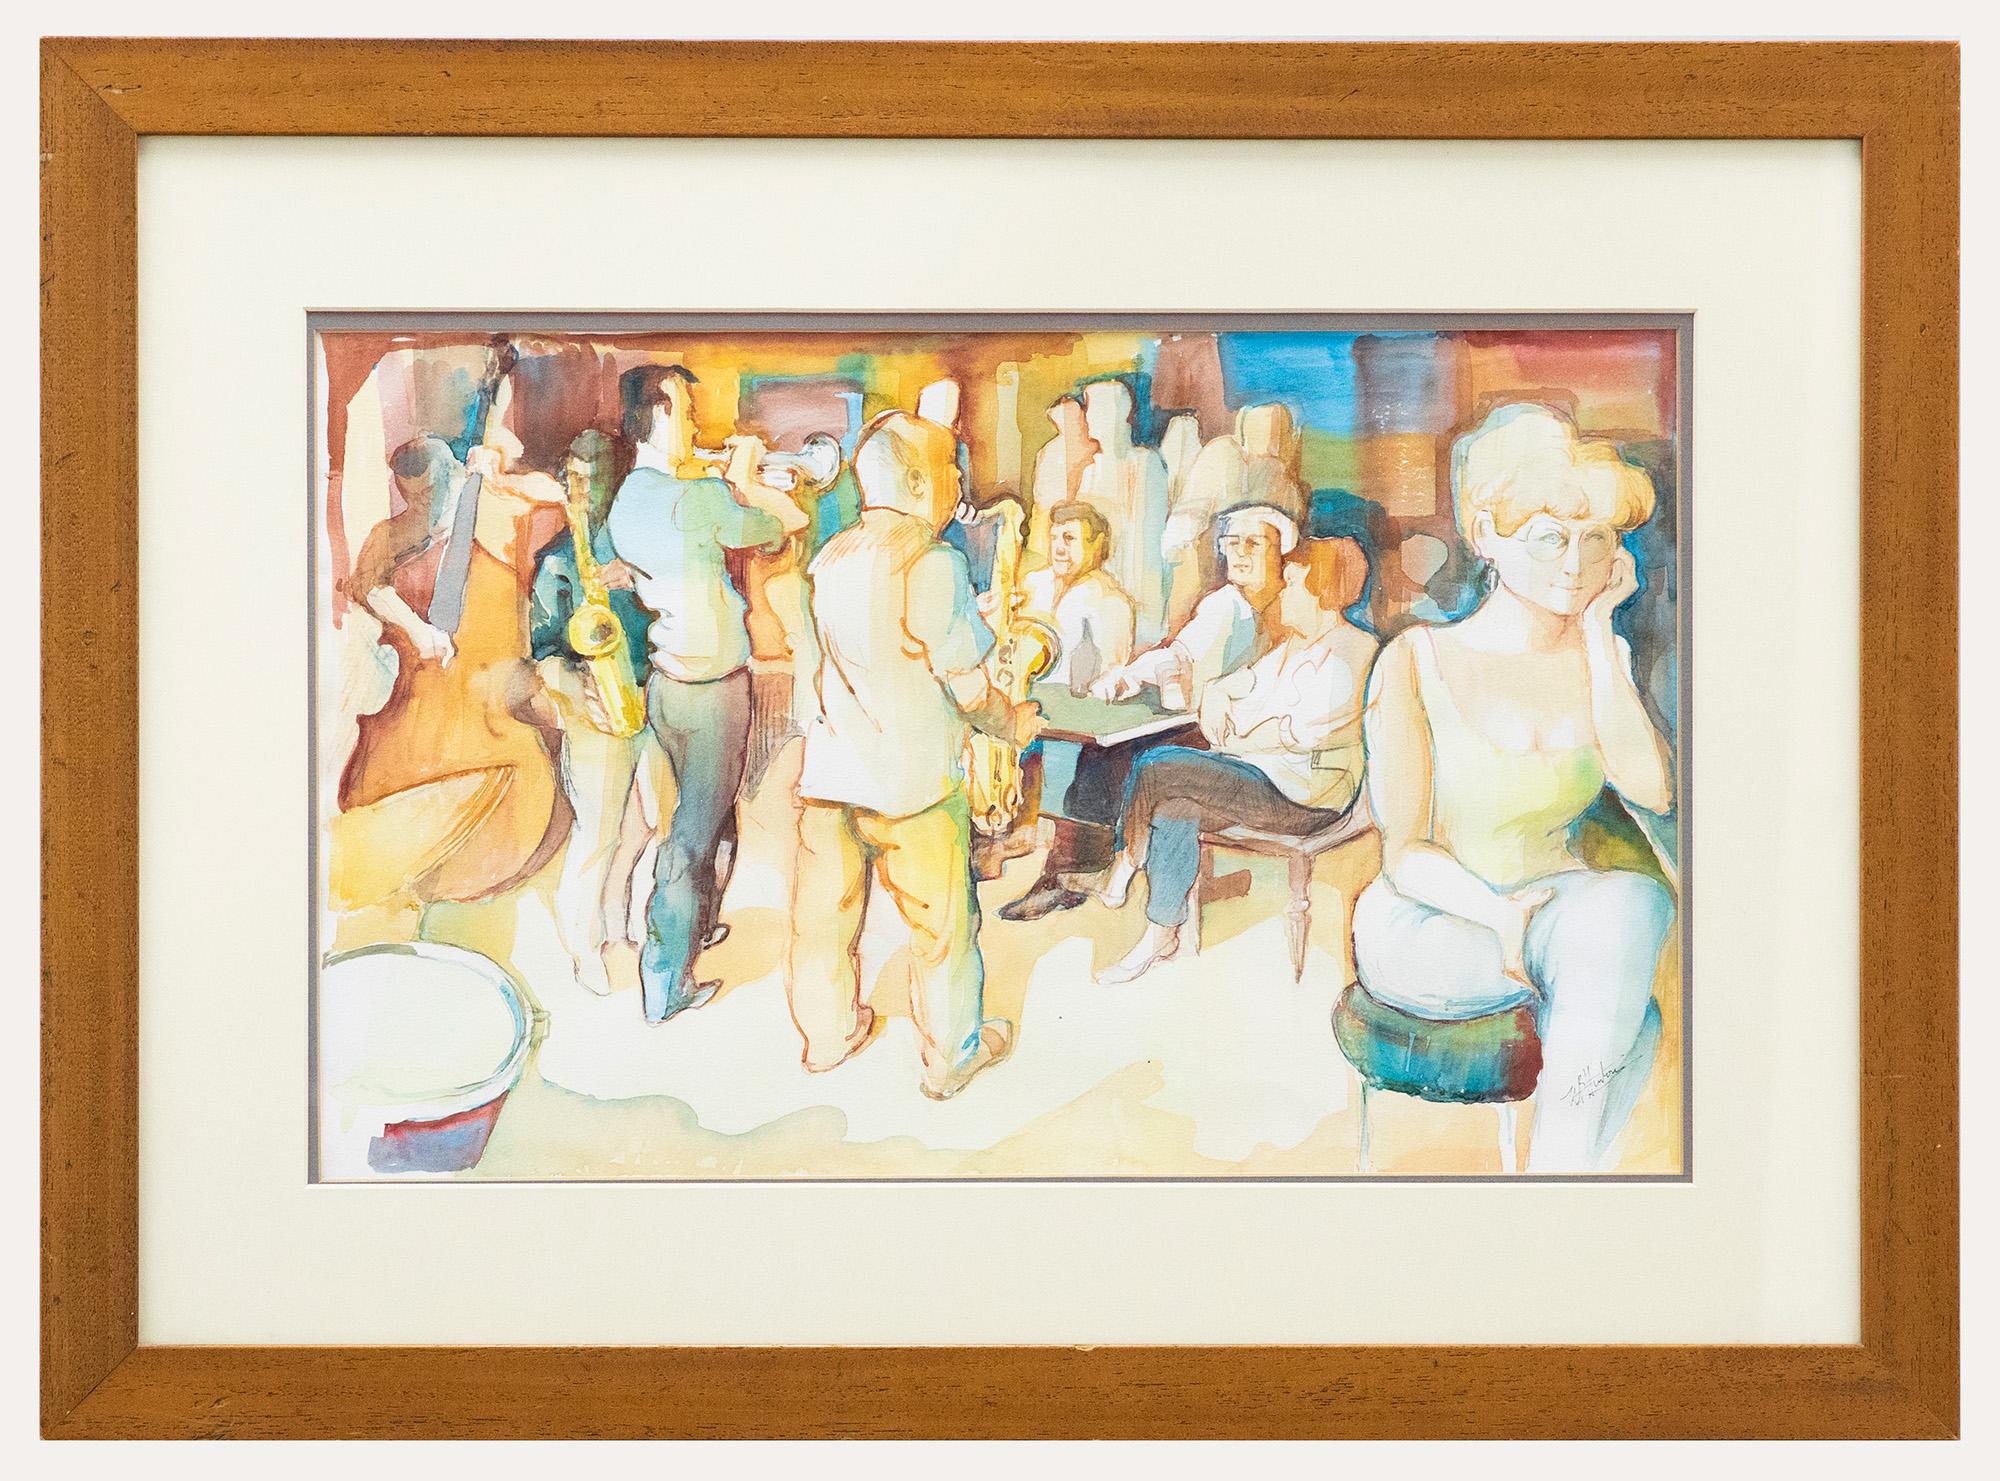 Unknown Figurative Art - W.B. Hinton - Framed Contemporary Watercolour, The Jazz Club